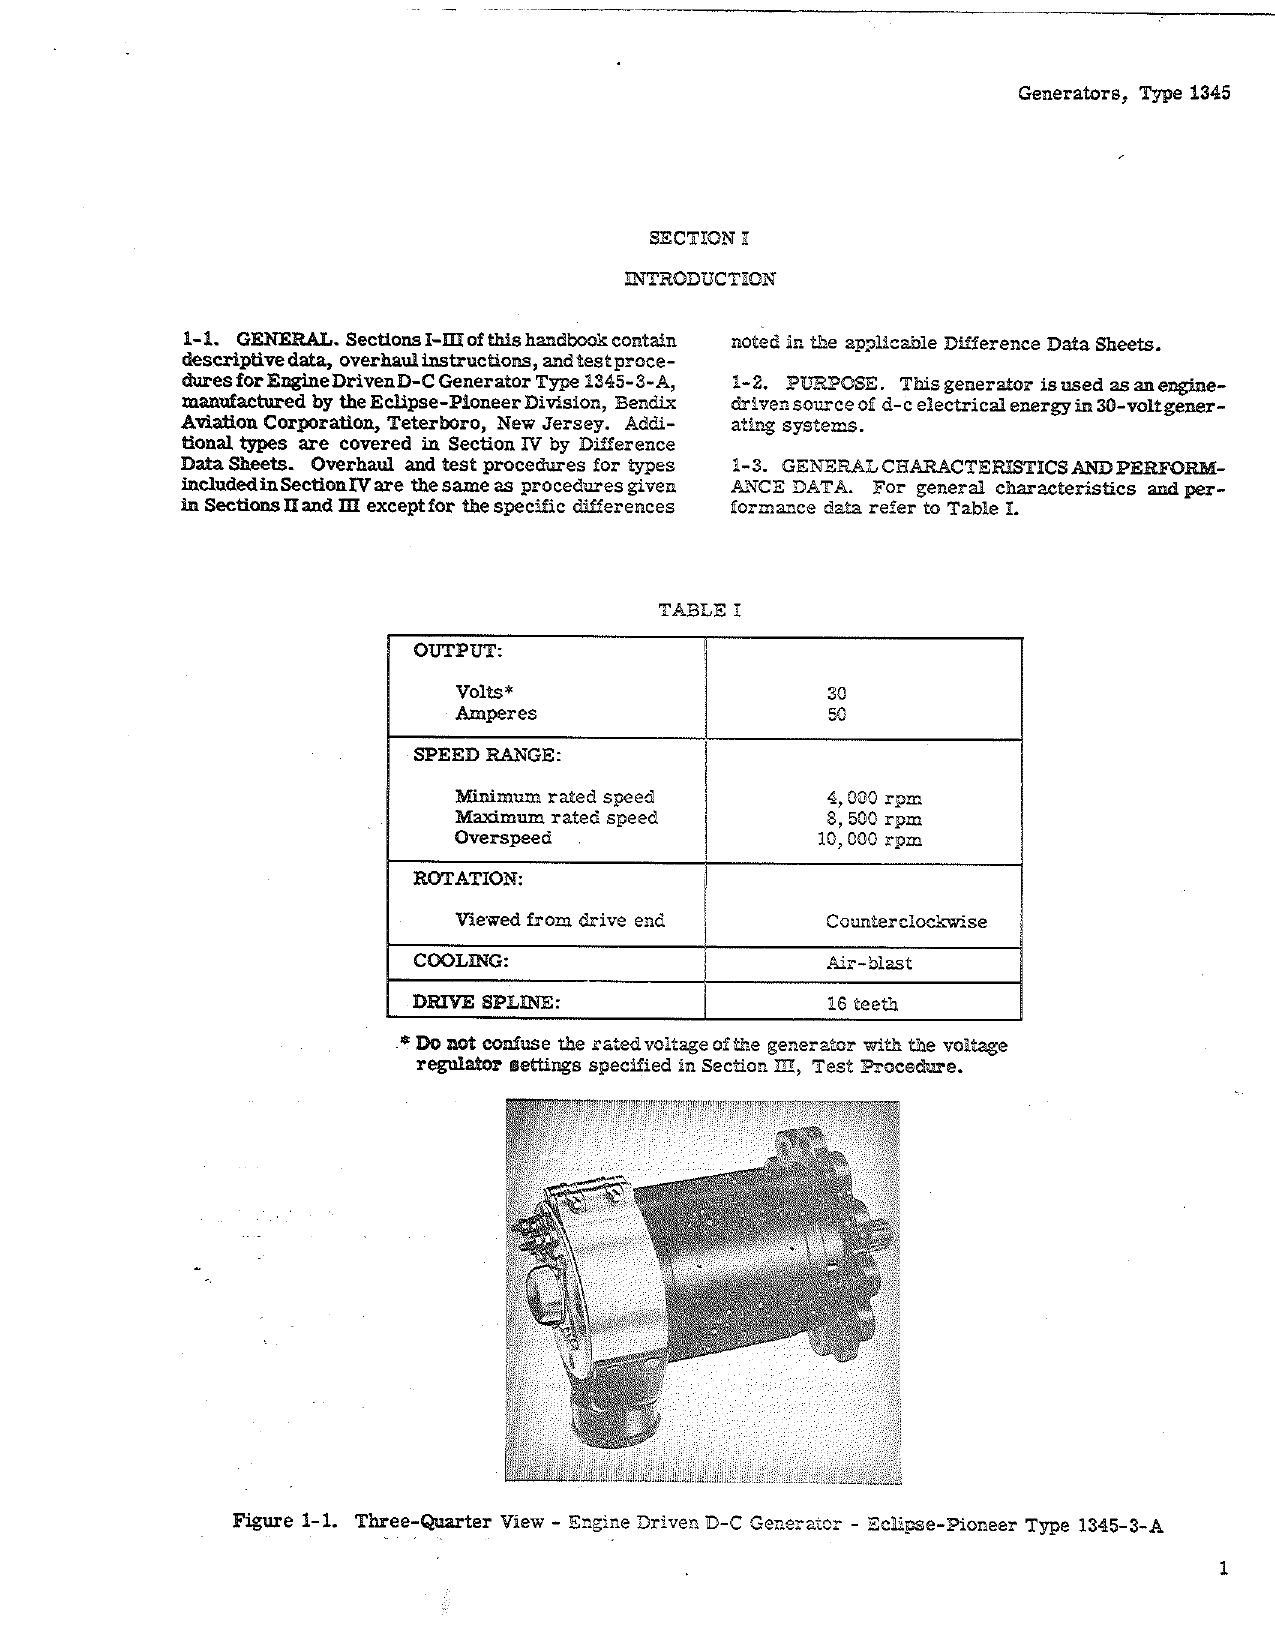 Sample page 5 from AirCorps Library document: Overhaul Instructions for Engine Driven DC Generator - Types 1345-3-A, 30B24-1-A, and 30E22-1-B